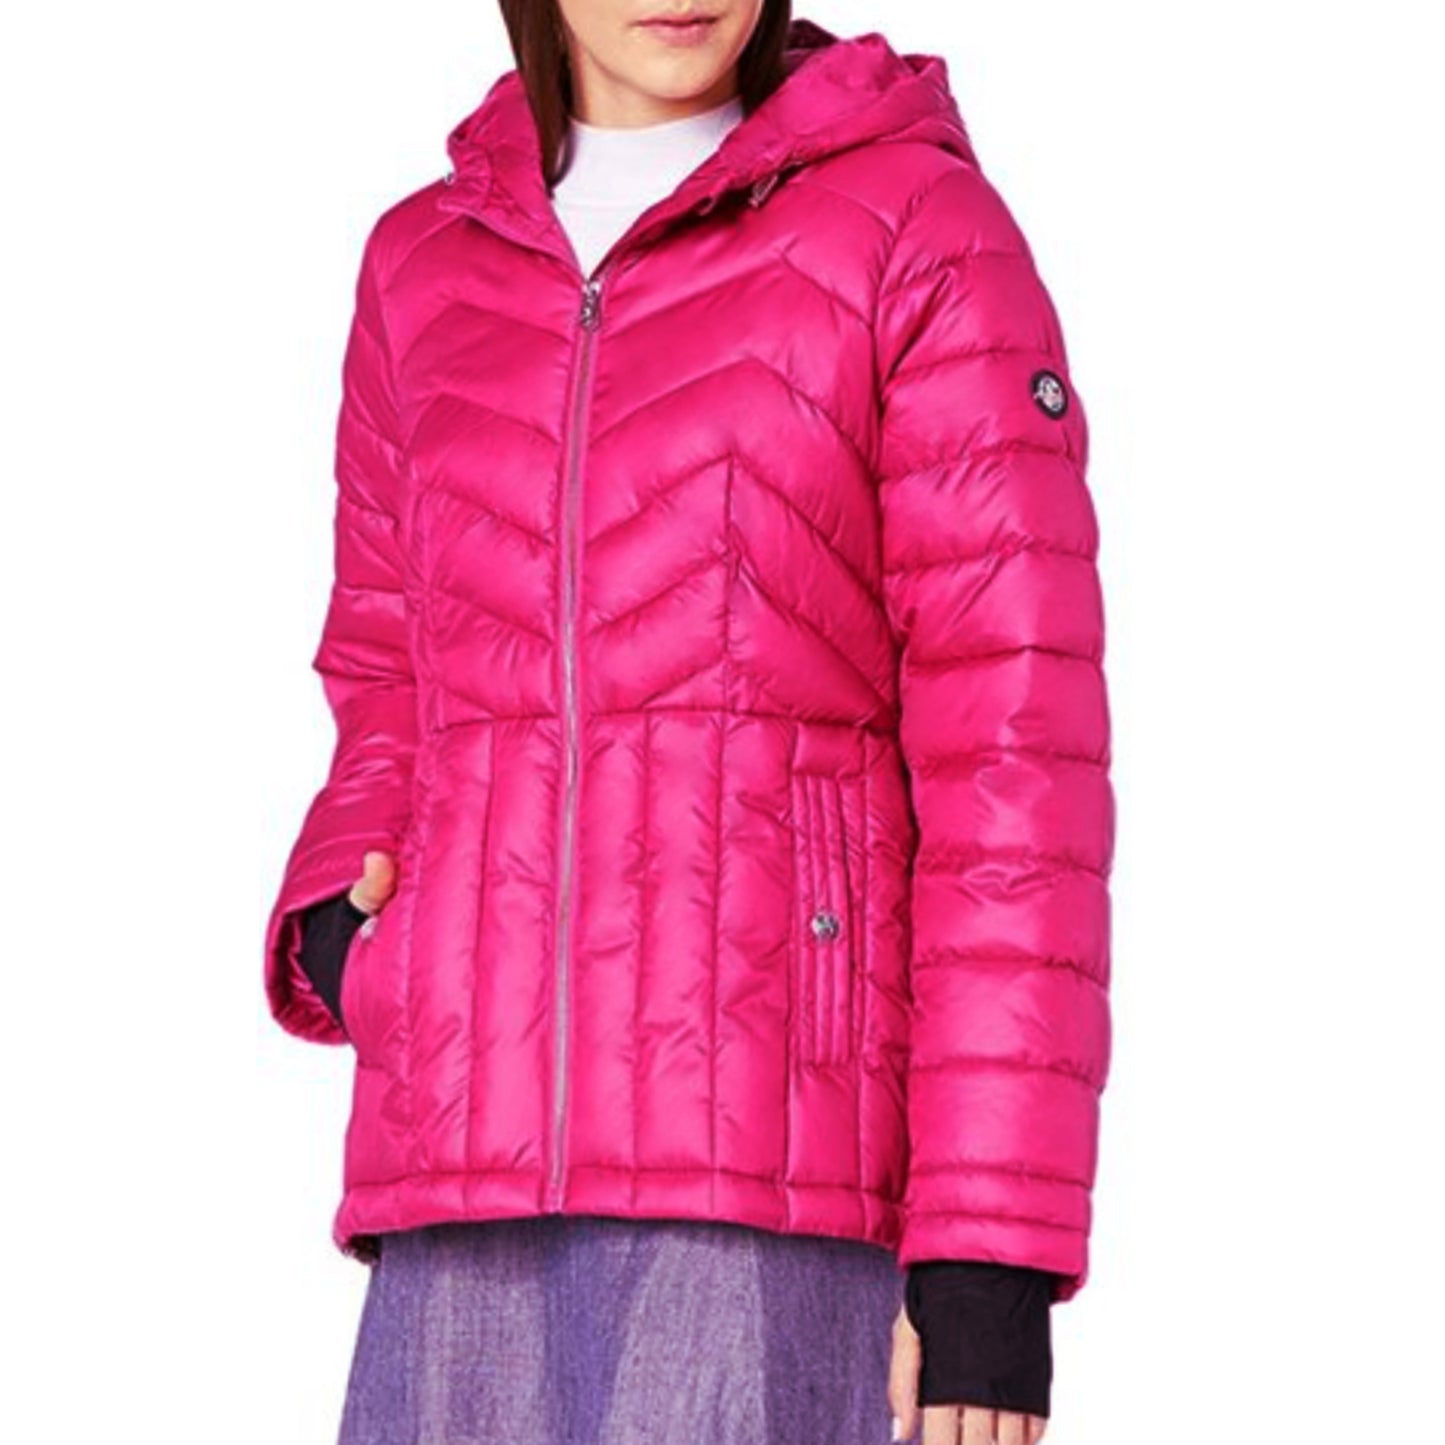 Jessica Simpson Women's Packable Quilted Insulated Hooded Puffer Winter Coat Jacket